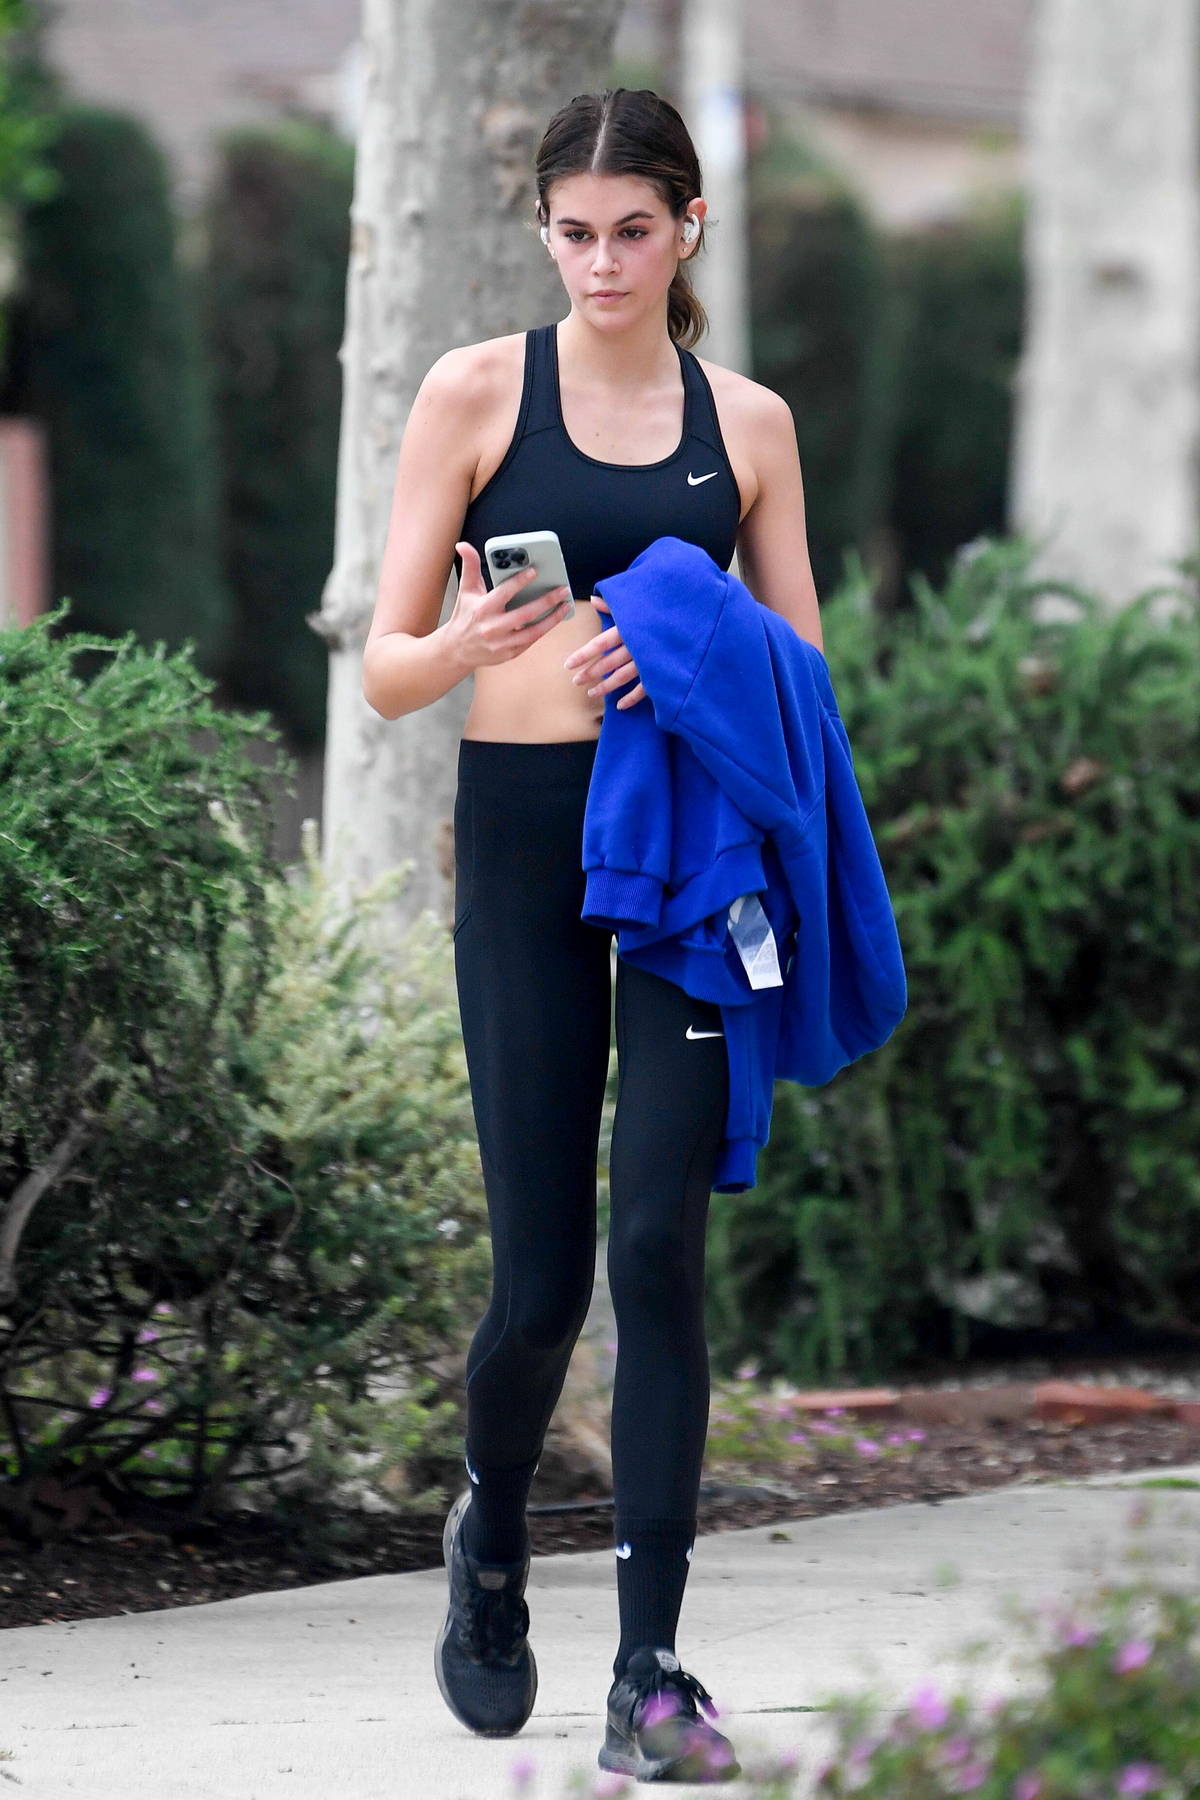 Kaia Gerber shows off her slender figure in a black sports bra and leggings  while leaving